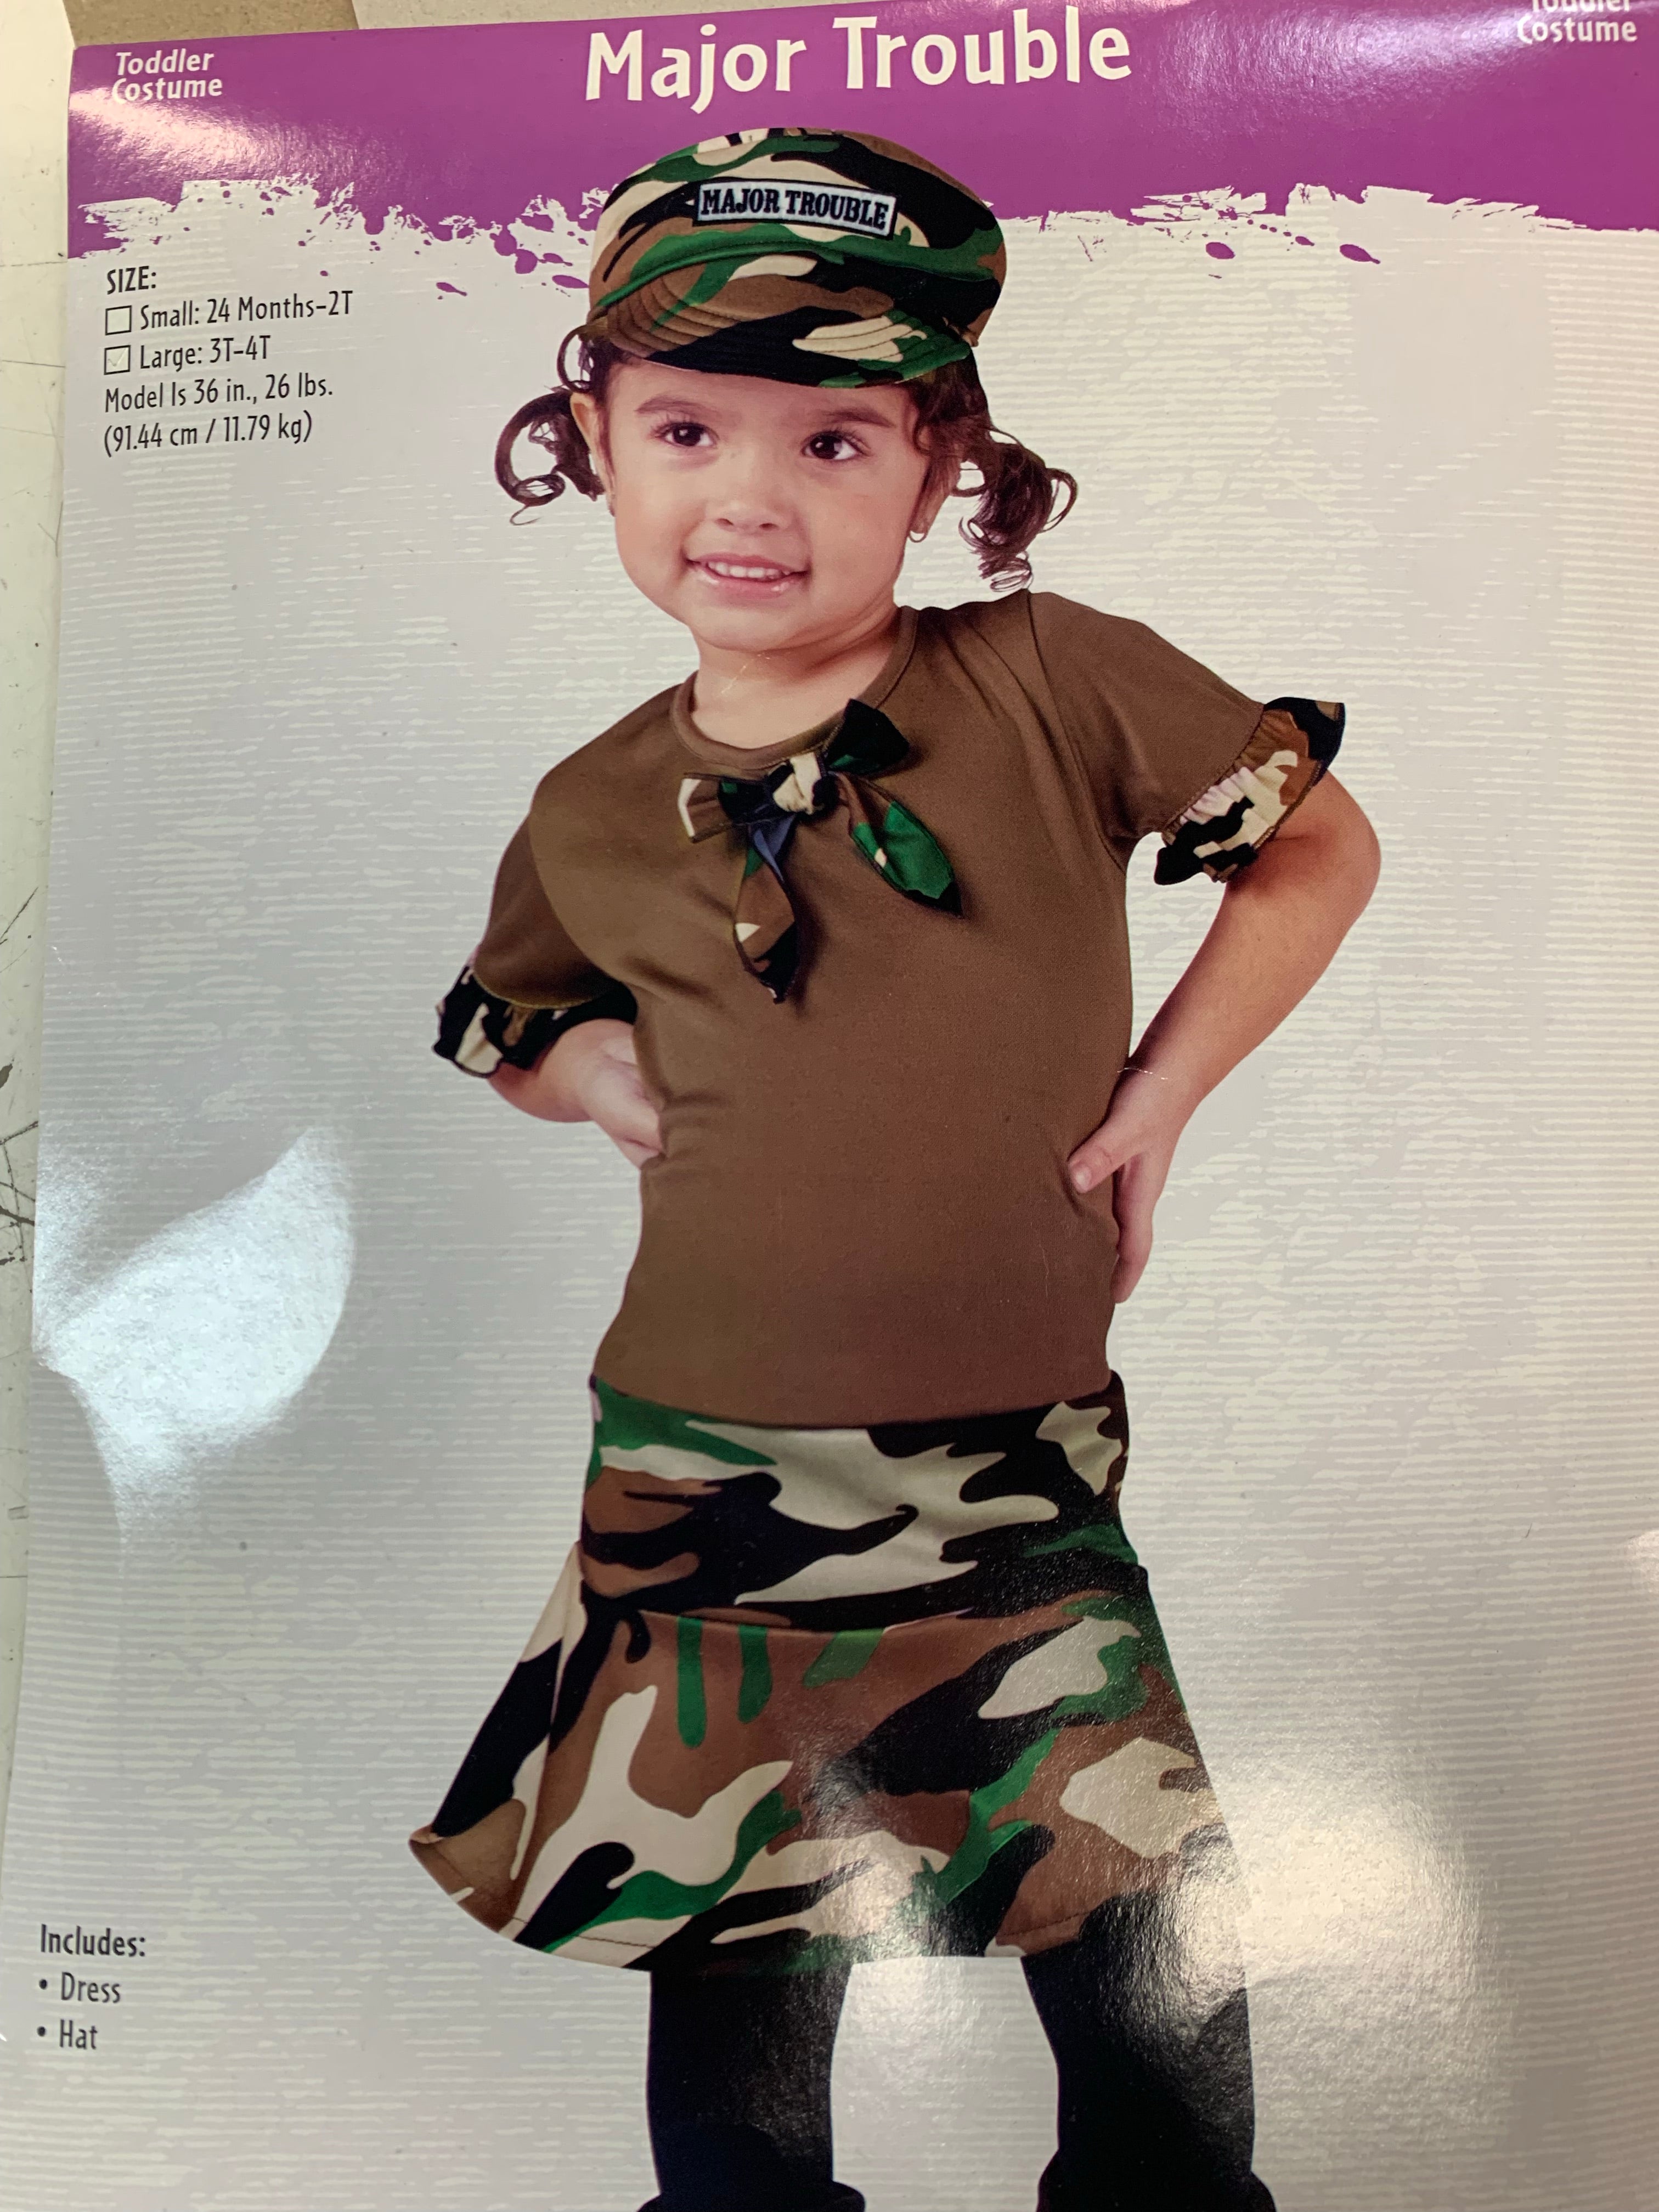 Major Trouble Costume Toddler